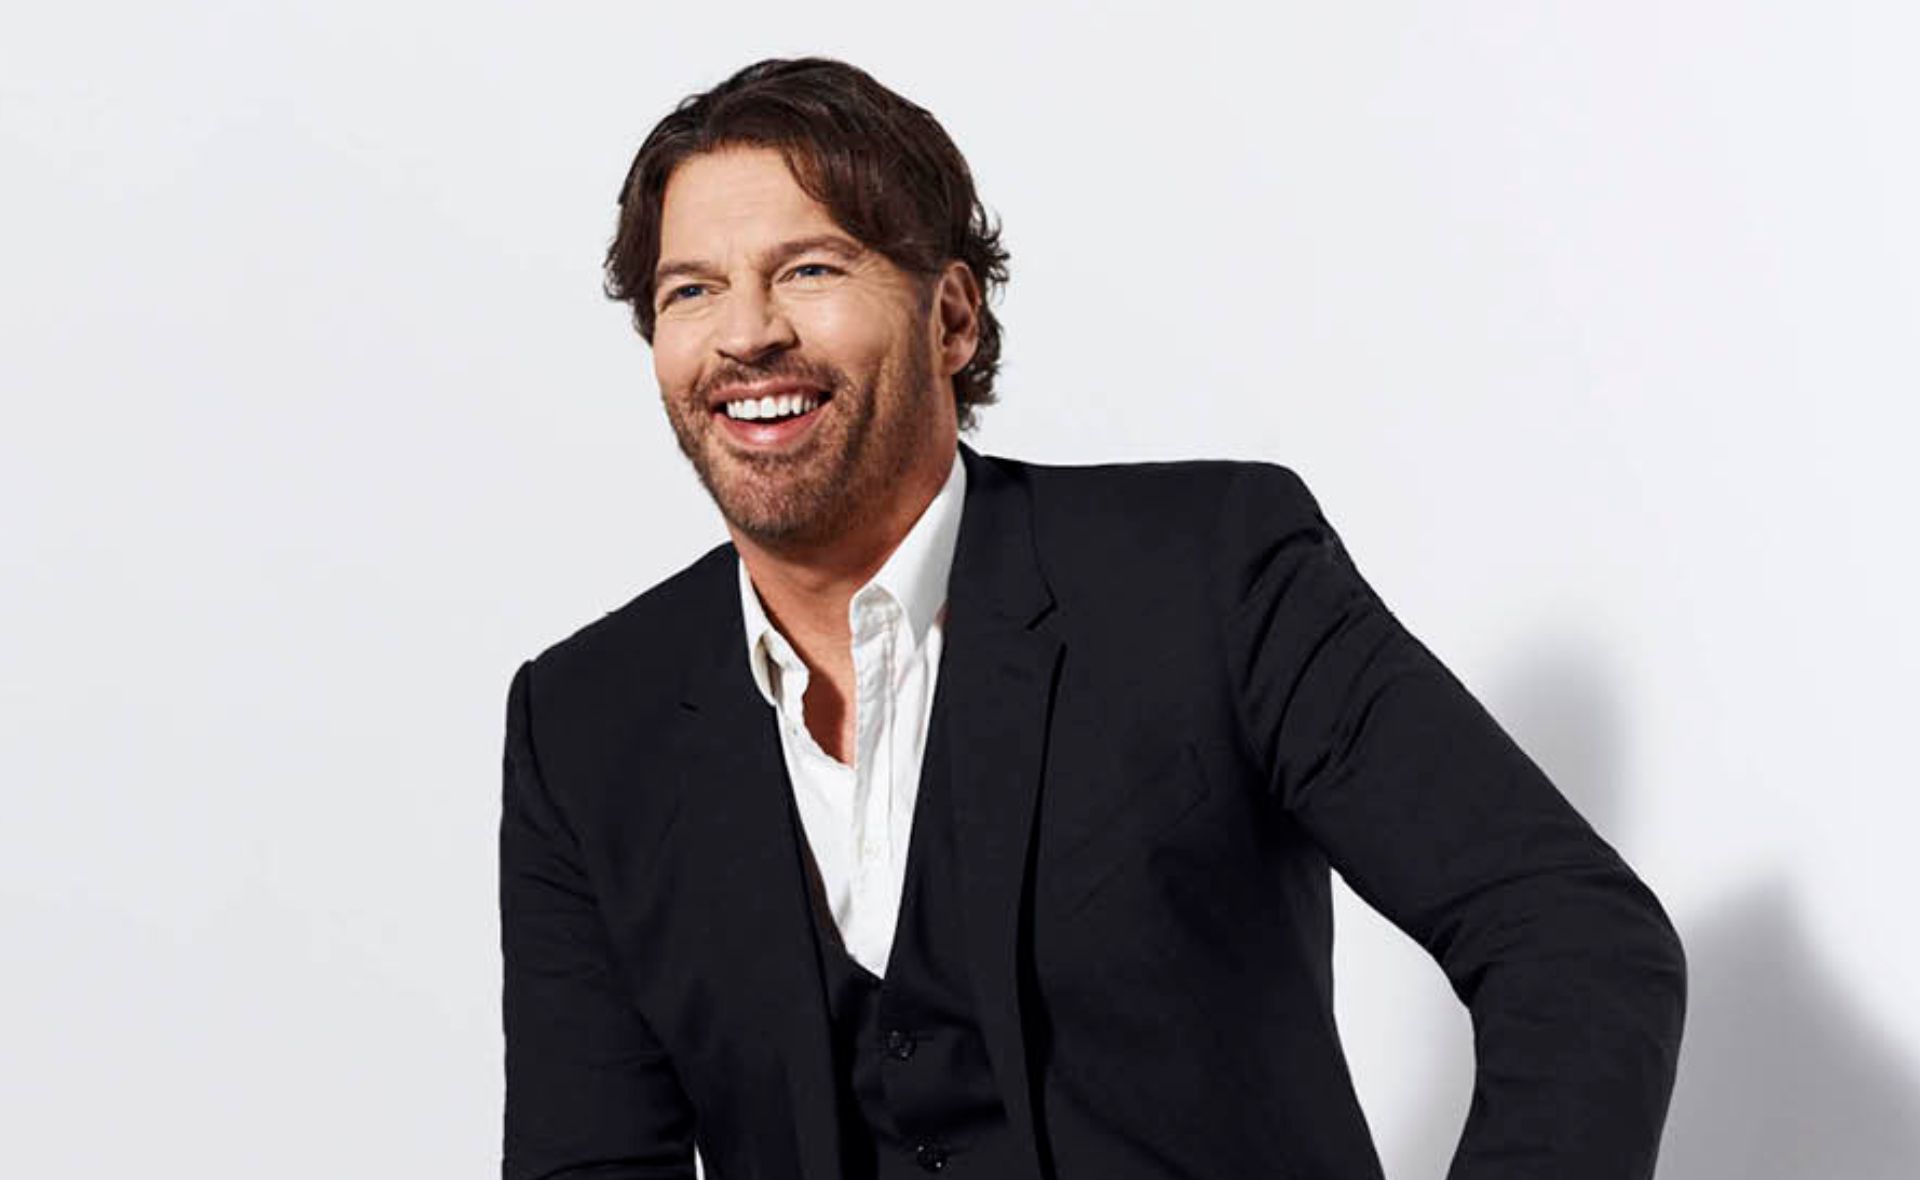 Australian Idol’s Harry Connick Jr might just be the nicest guy in the world